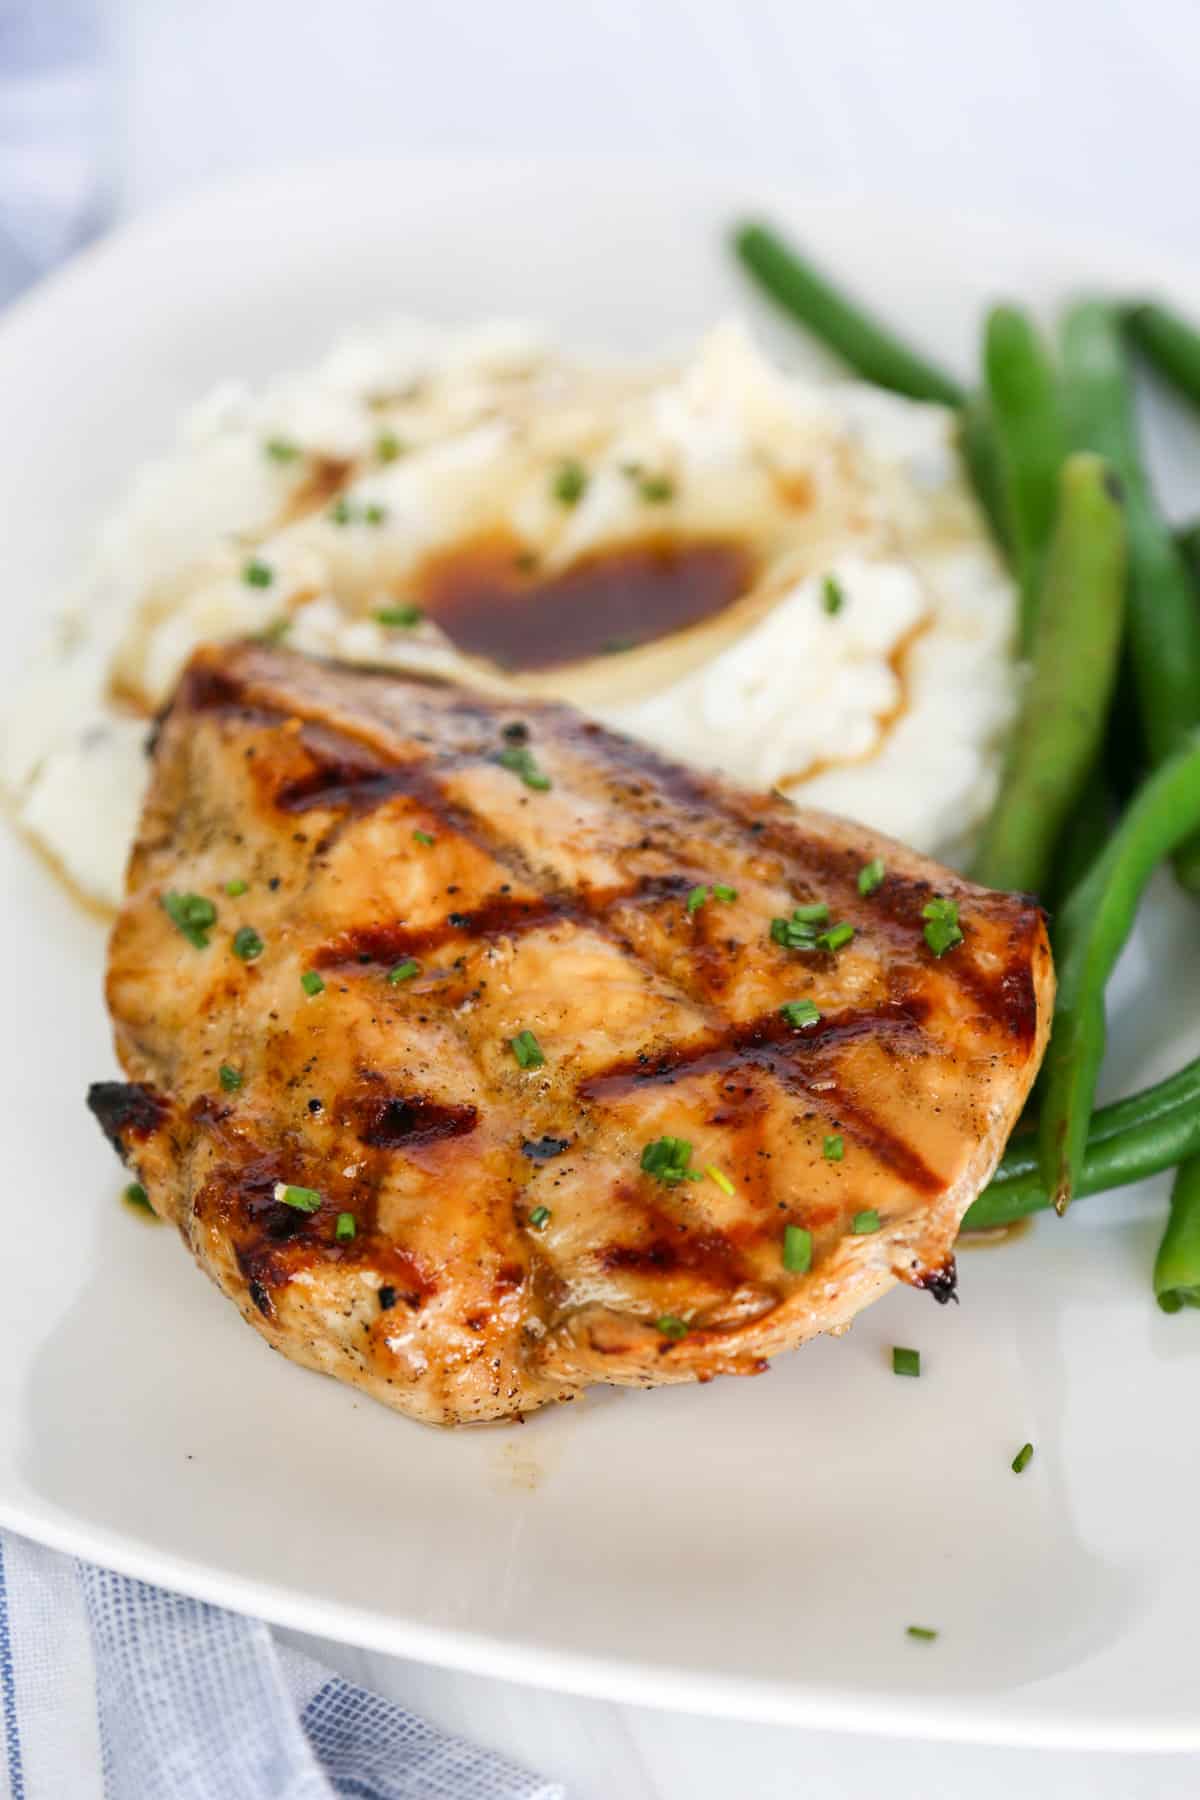 grilled savory chicken breast with mashed potatoes and green beans on a plate